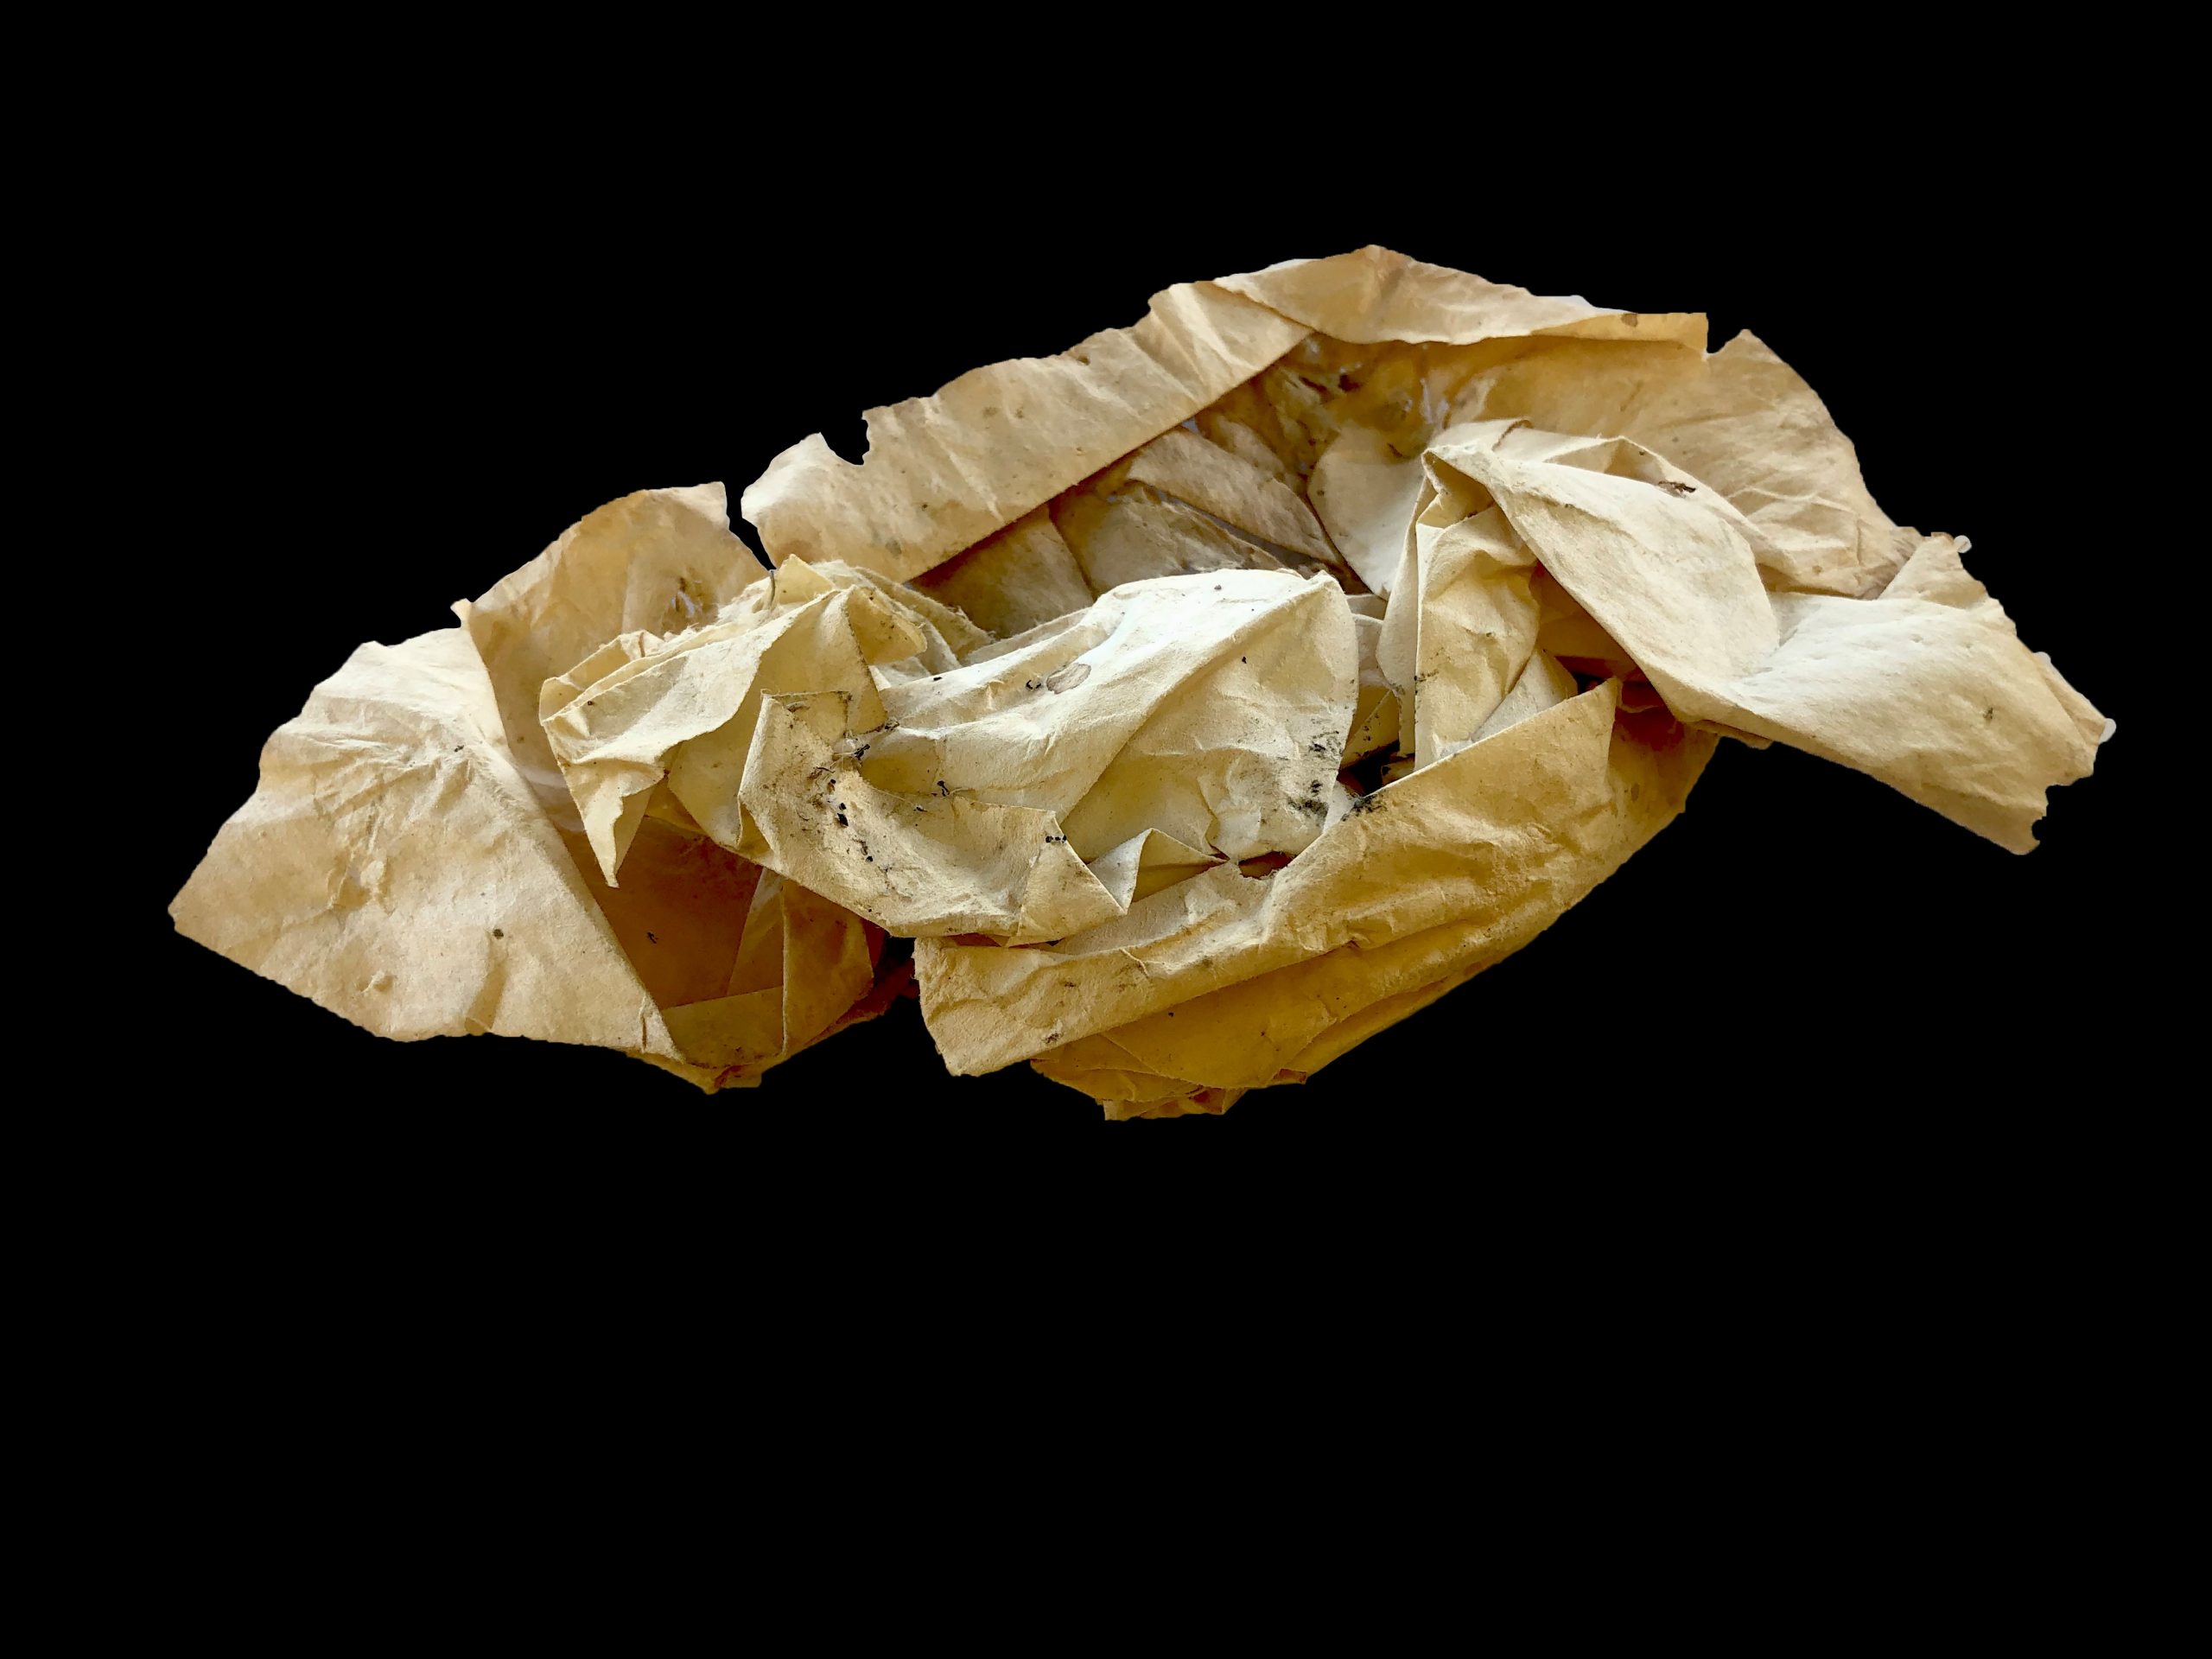 A crumpled piece of paper